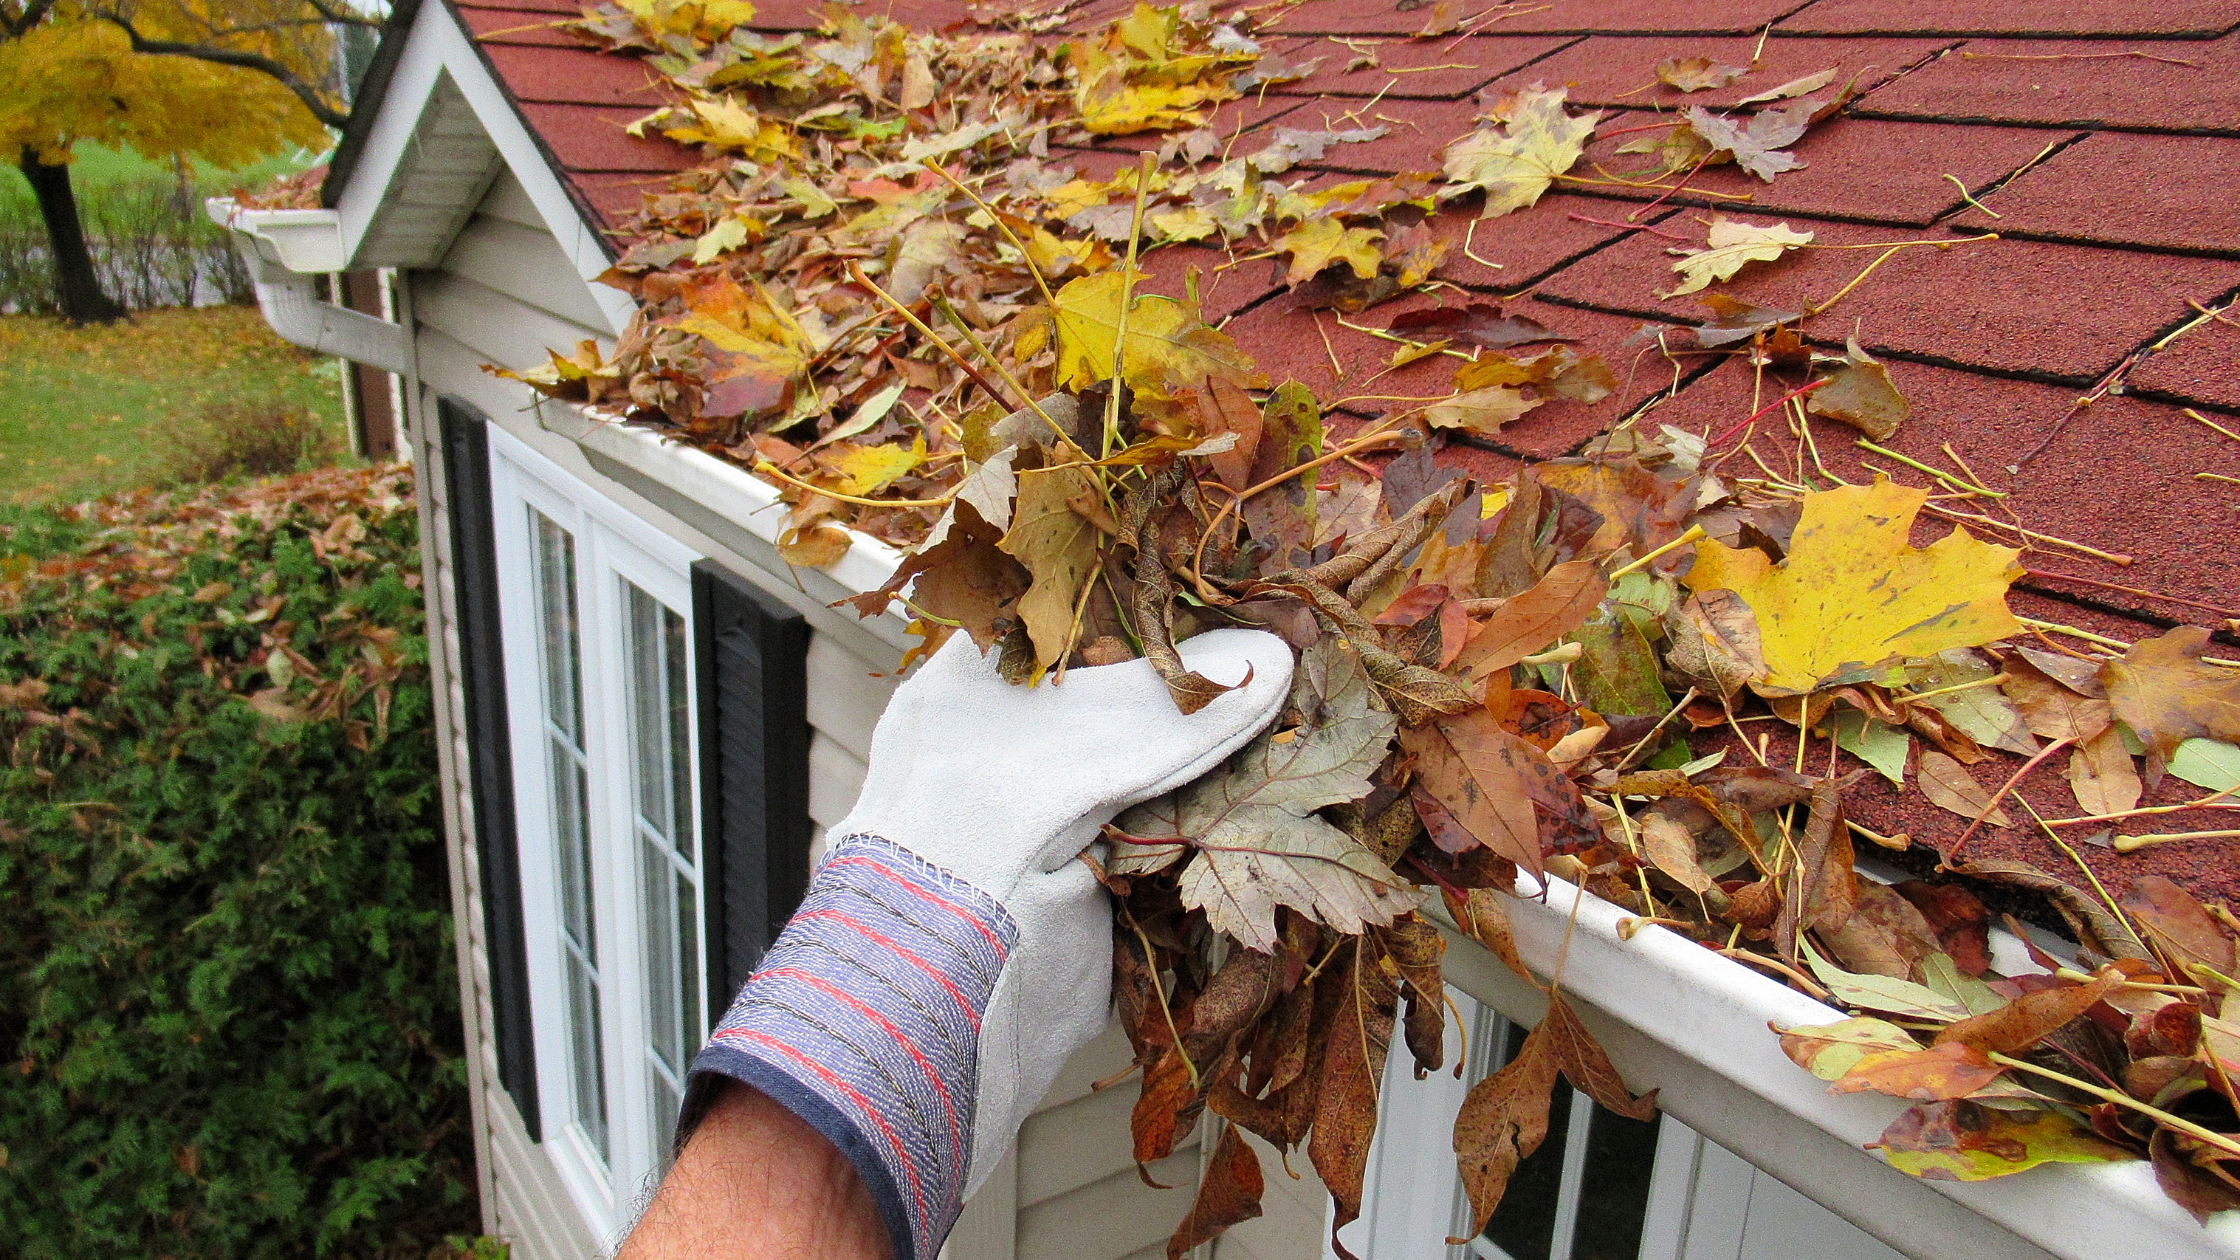 What Items Should Be On a Seasonal Home Maintenance Checklist?